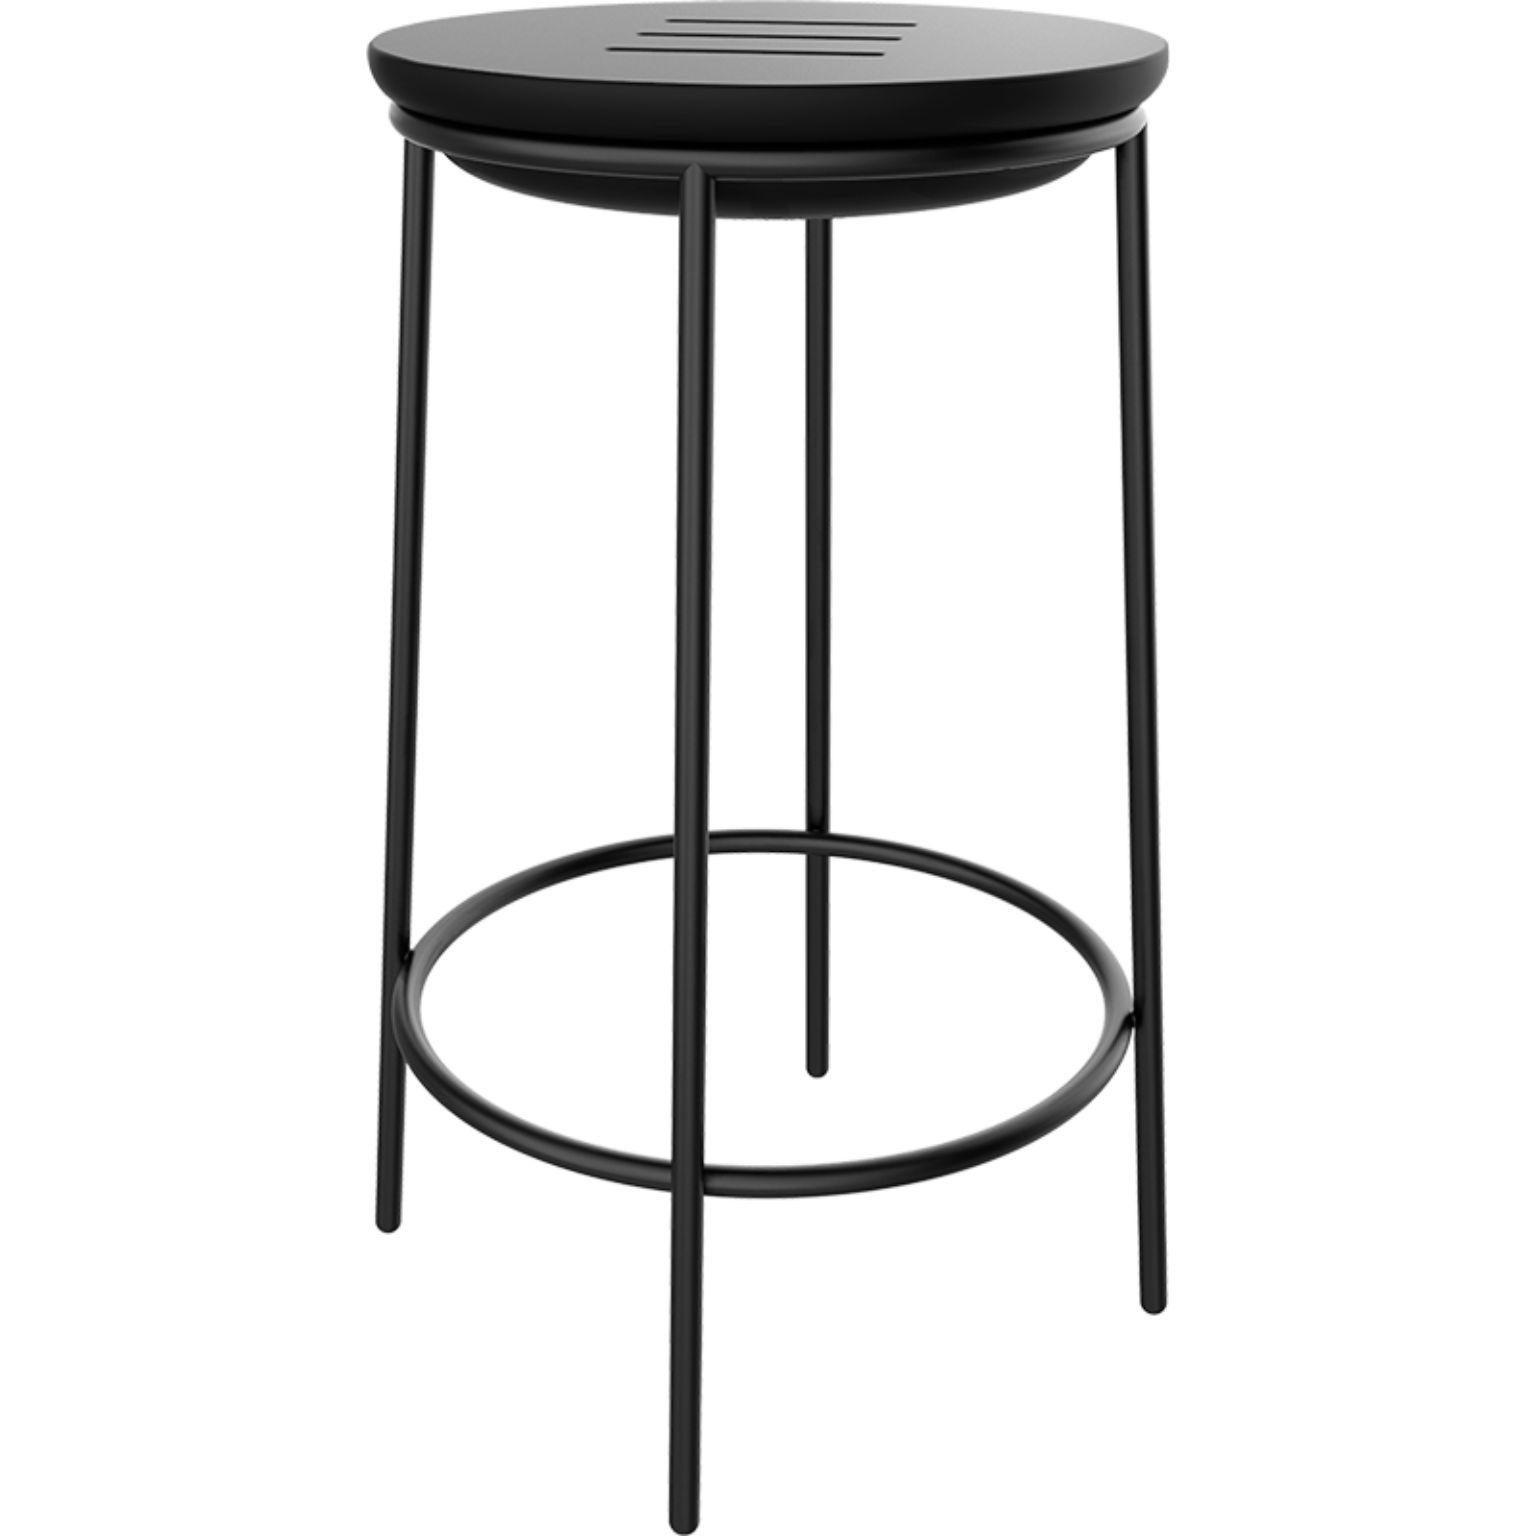 Lace black 60 high table by MOWEE
Dimensions: D75 x H111 cm
Material: Polyethylene and stainless steel
Weight: 10.5 kg
Also available in different colors and finishes. 

Lace is a collection of furniture made by rotomoulding. Its shape